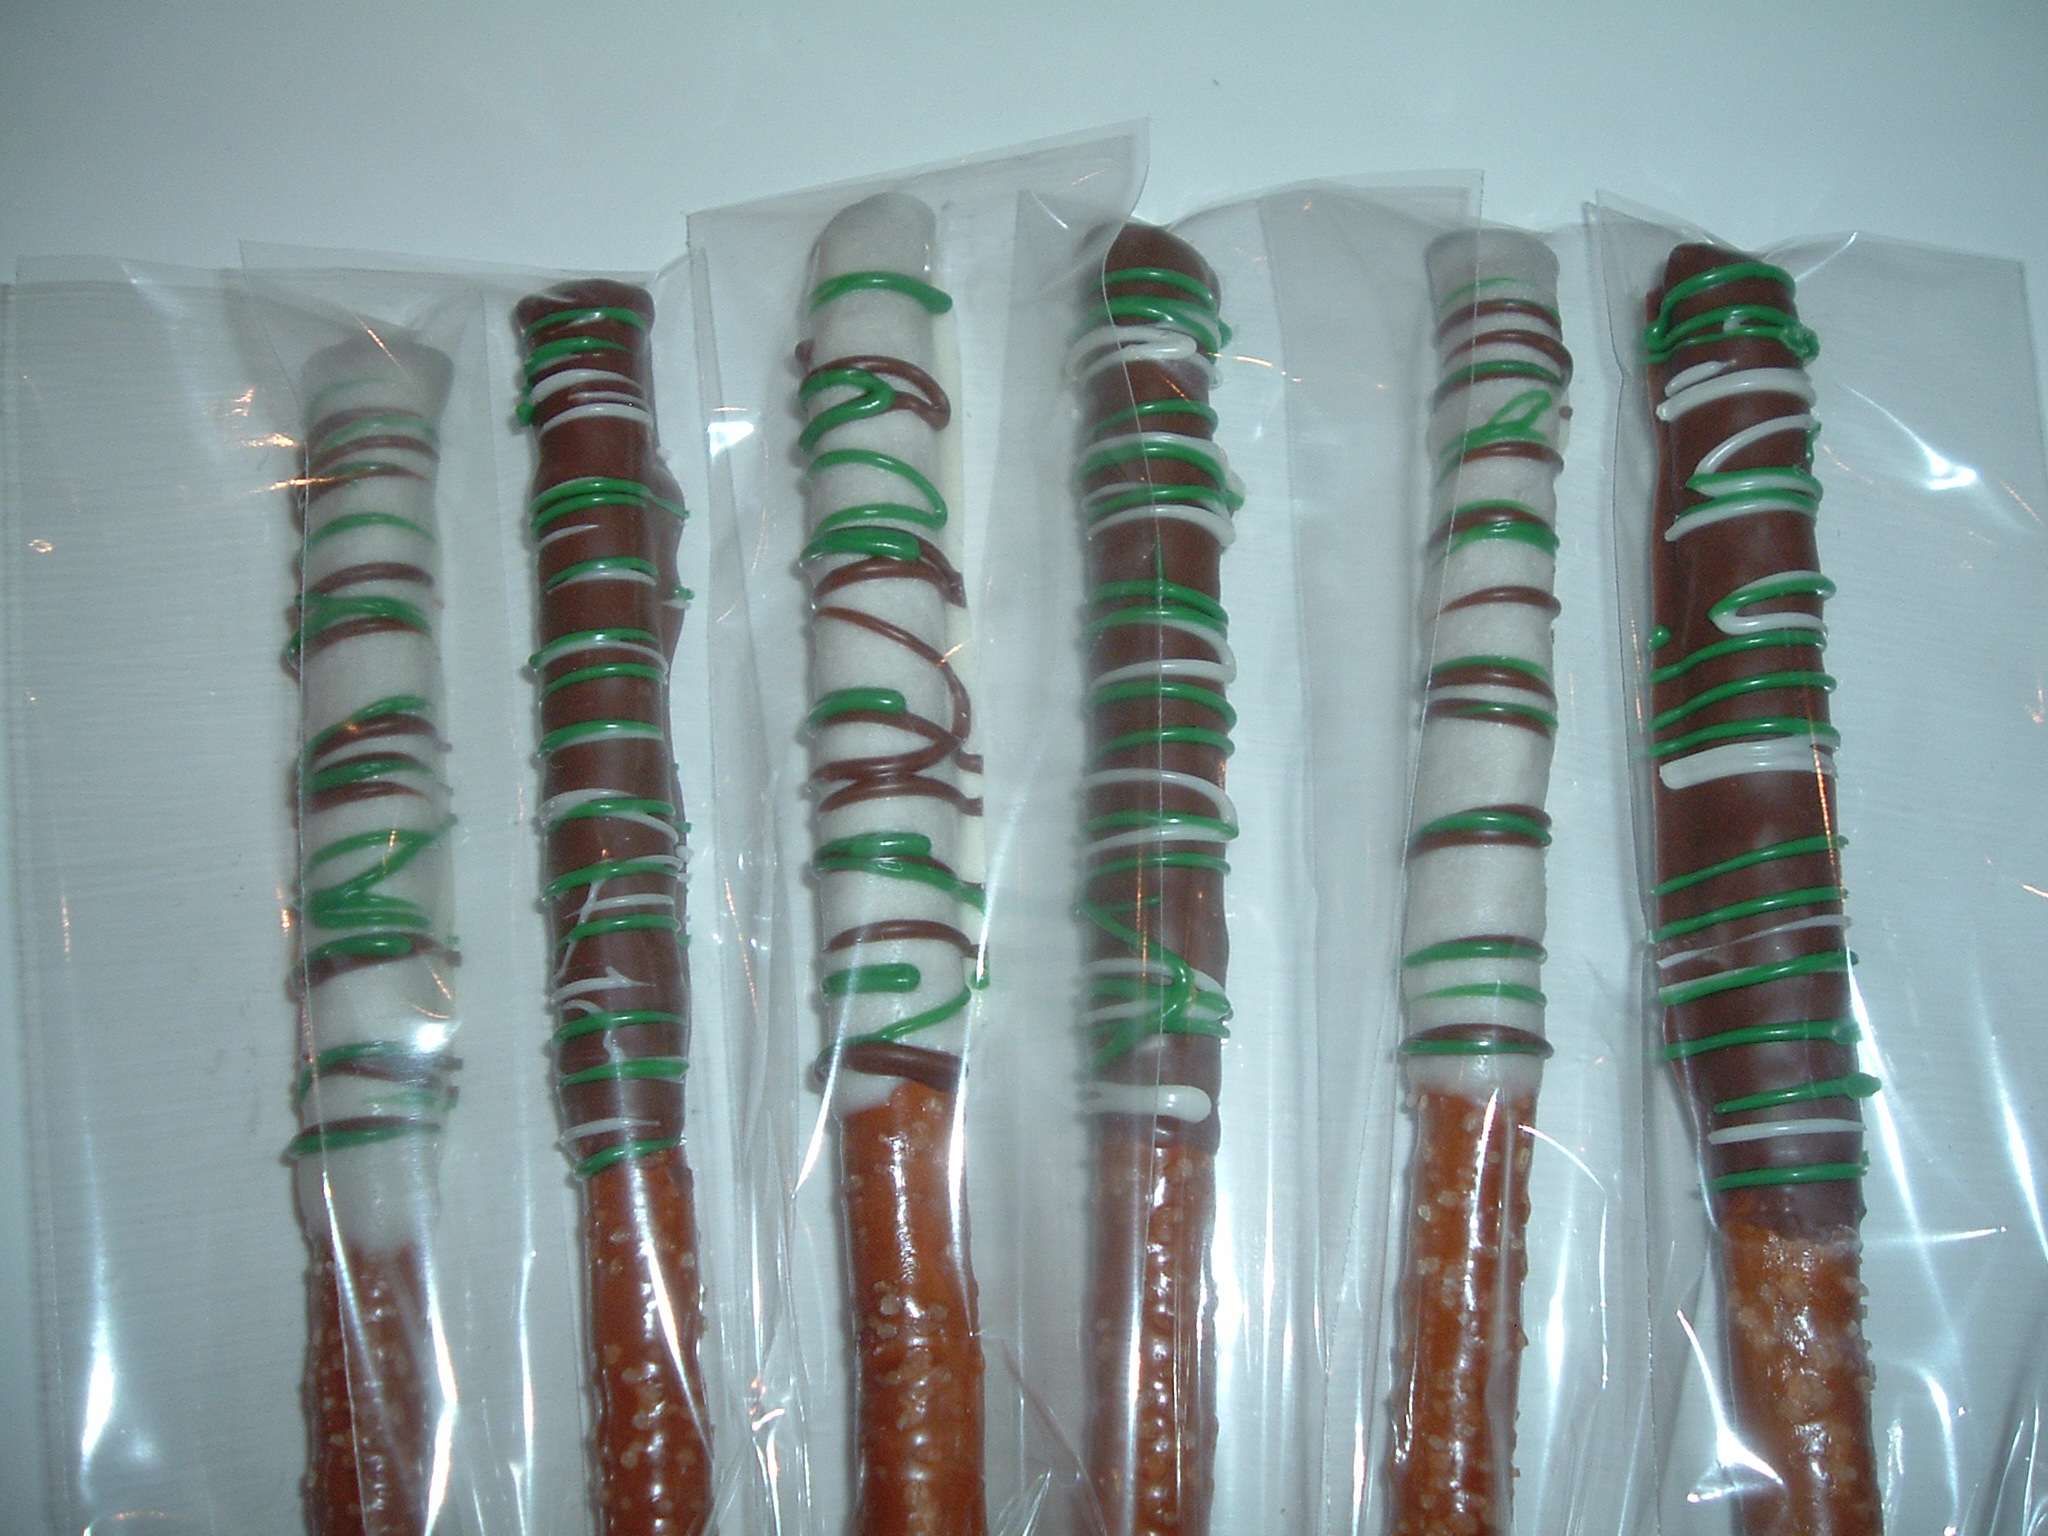 St. Patty's Day Chocolate Covered Pretzels w/ Chocolate Drizzle Box of 12